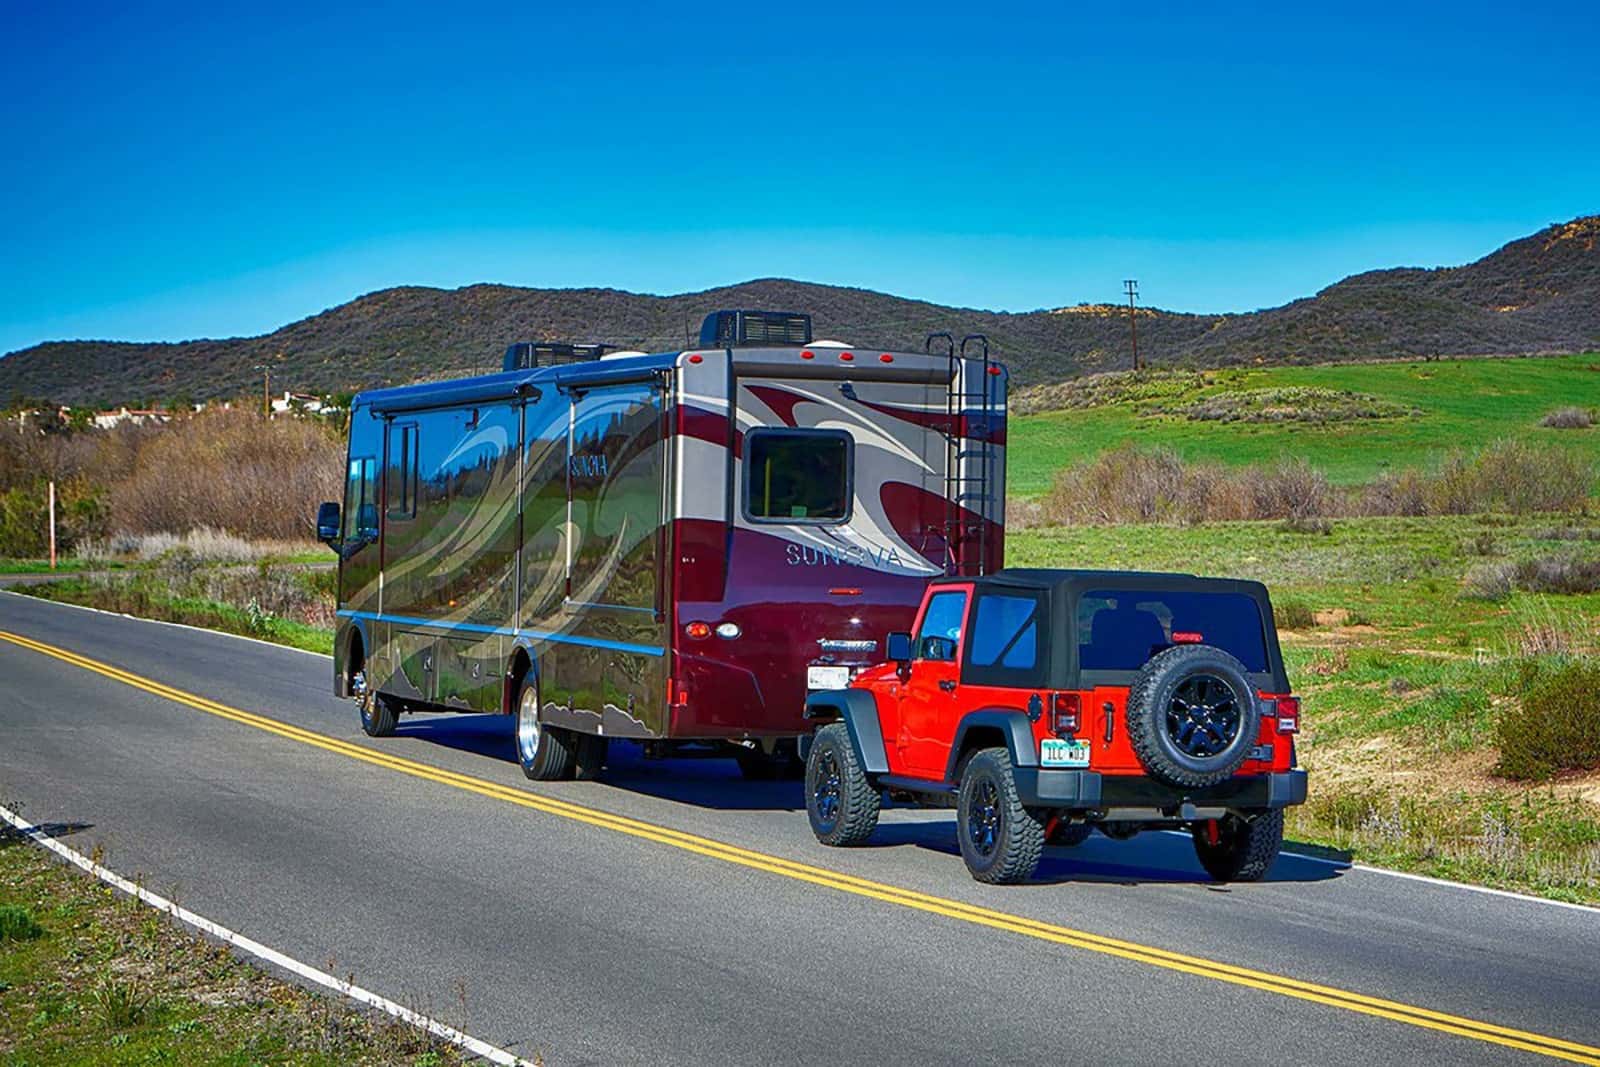 What Are The Best Cars To Tow Behind RV And Motorhome?